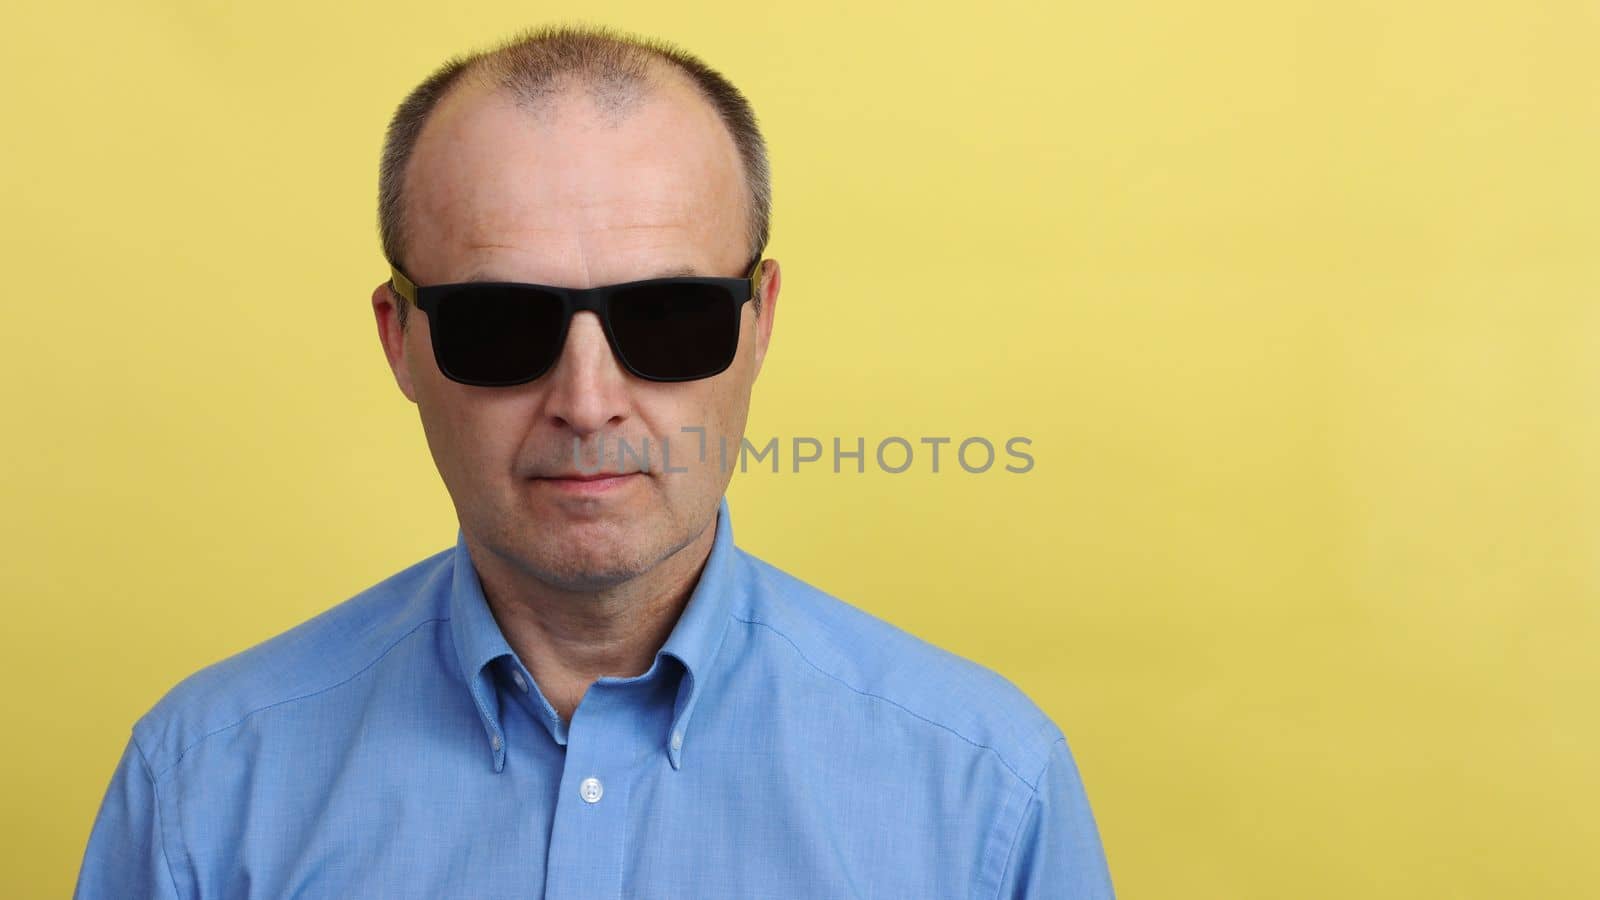 Satisfied attractive man 40-55 years old in a blue shirt on a yellow background with two glasses on his face. by gelog67